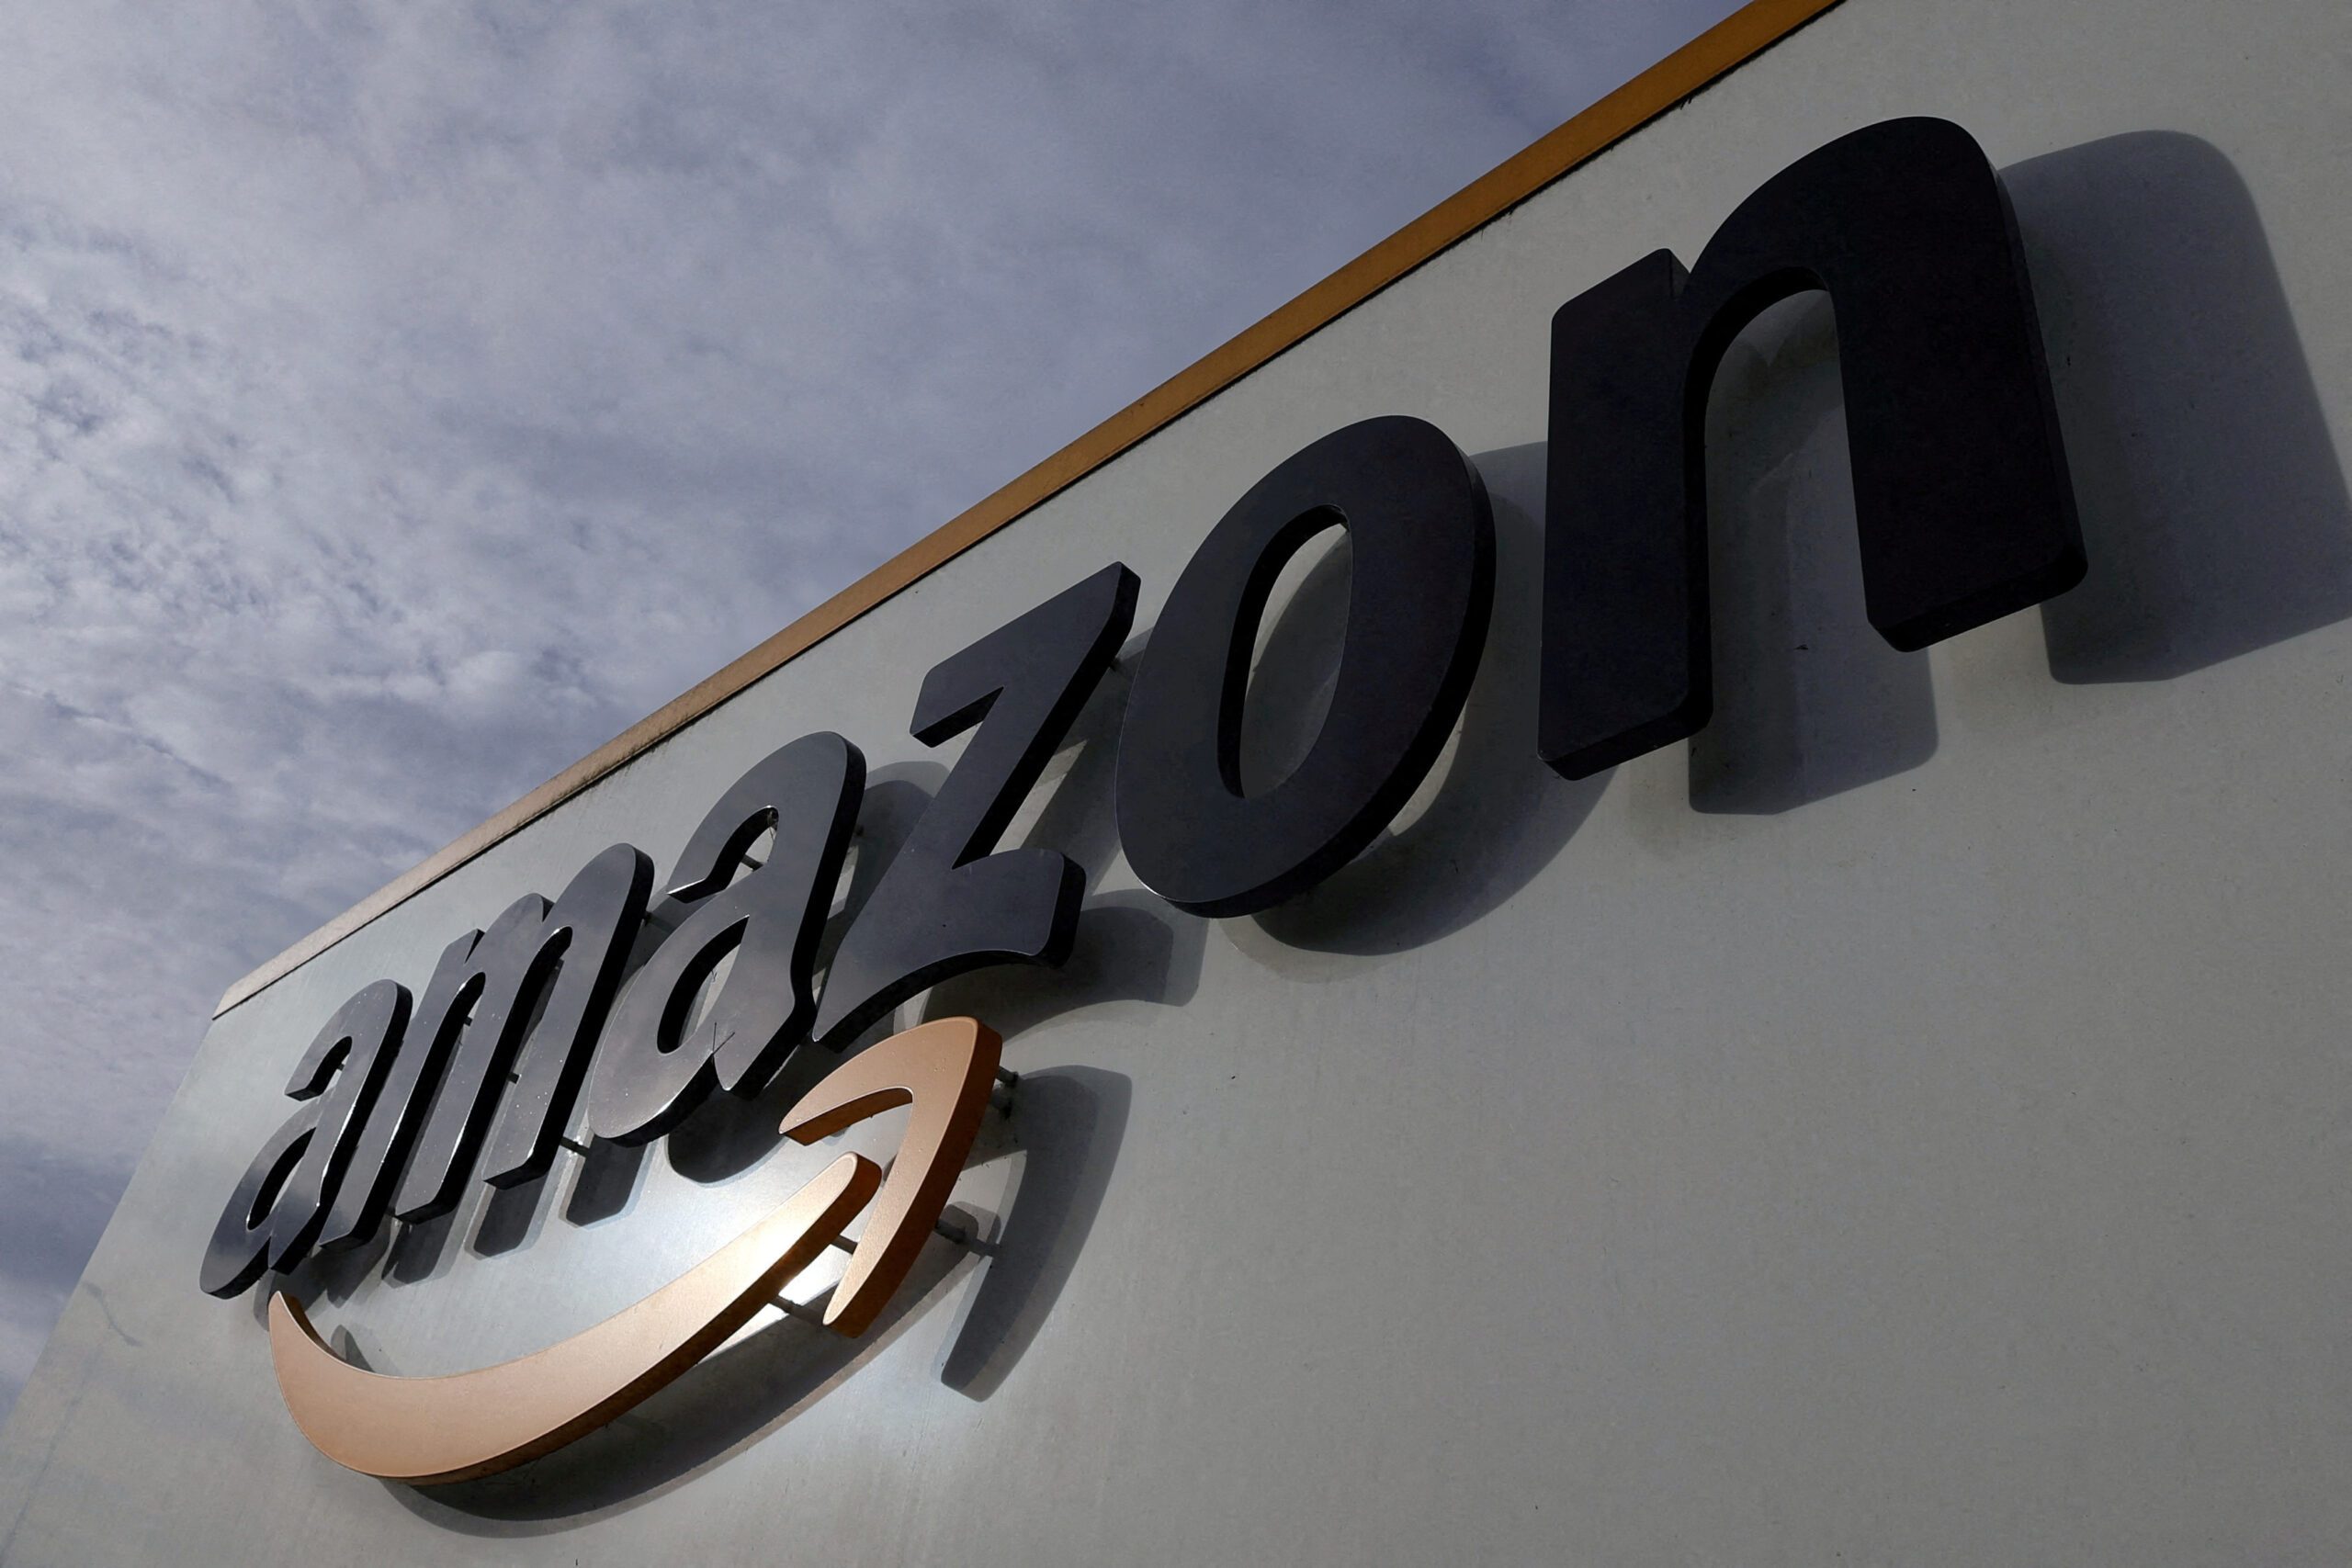 Amazon steps up AI race with up to $4b investment in Anthropic